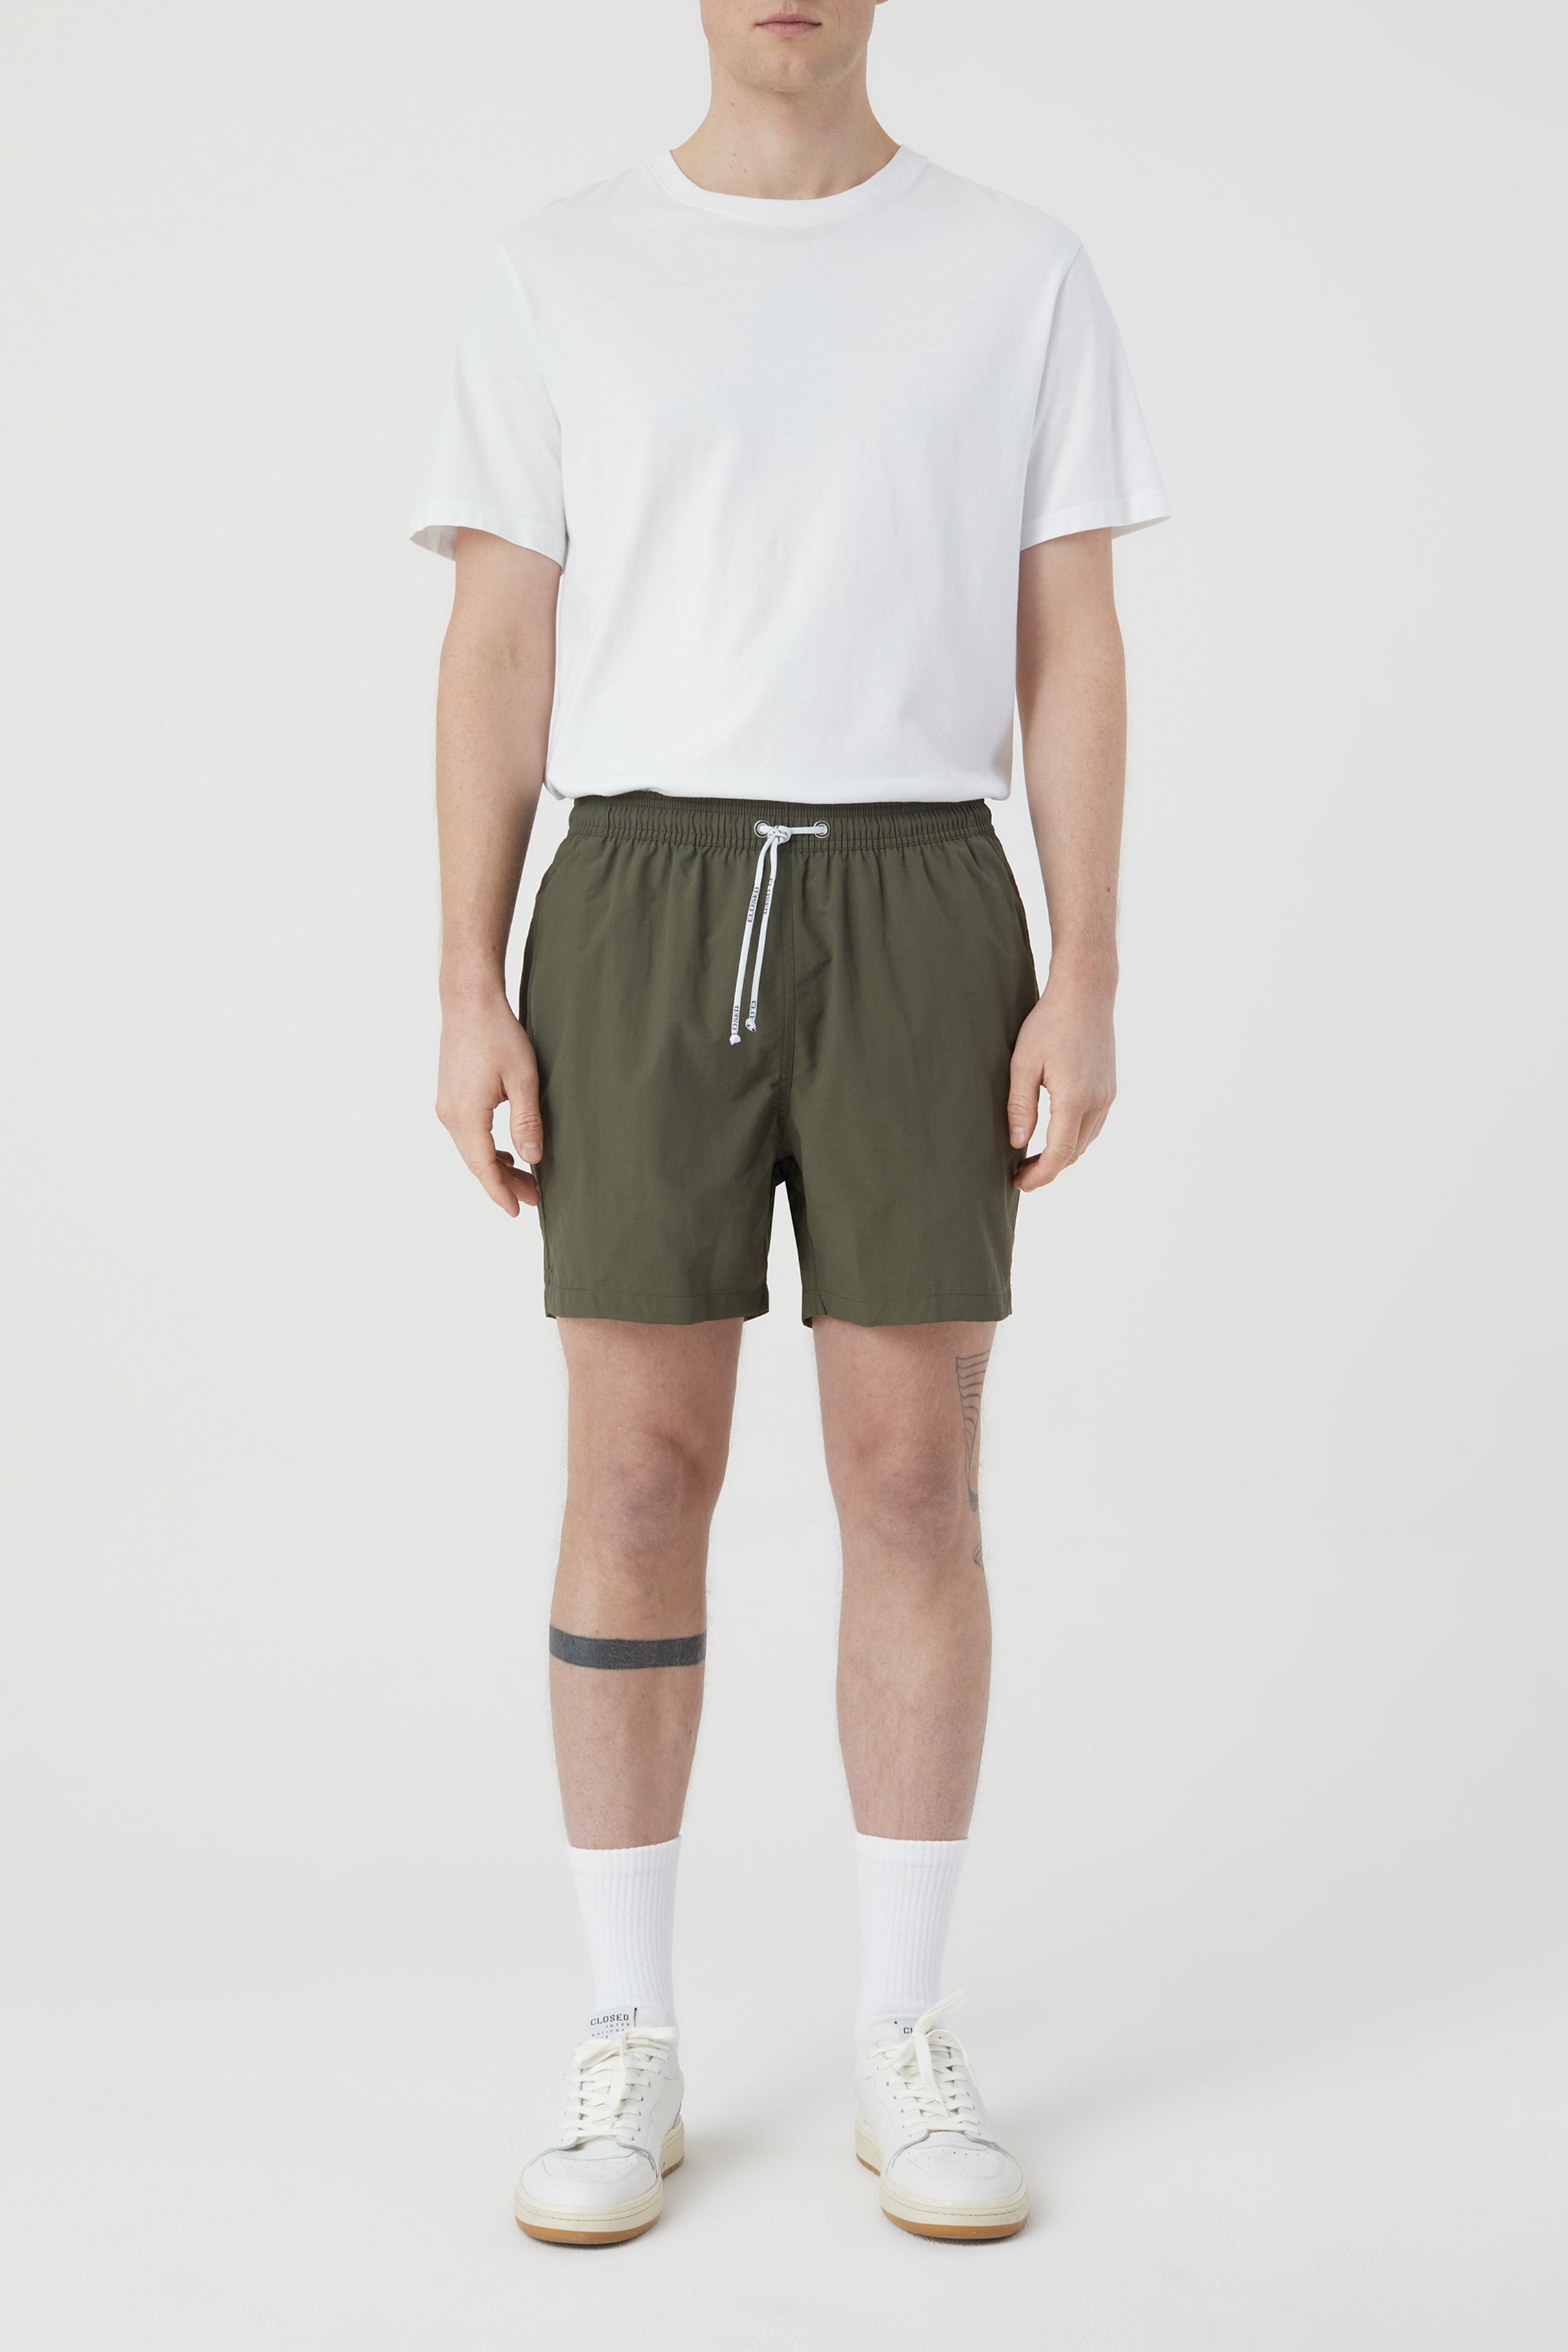 CLOSED-OUTLET-SALE-SWIM-SHORTS-Hosen-ARCHIVE-COLLECTION.jpg